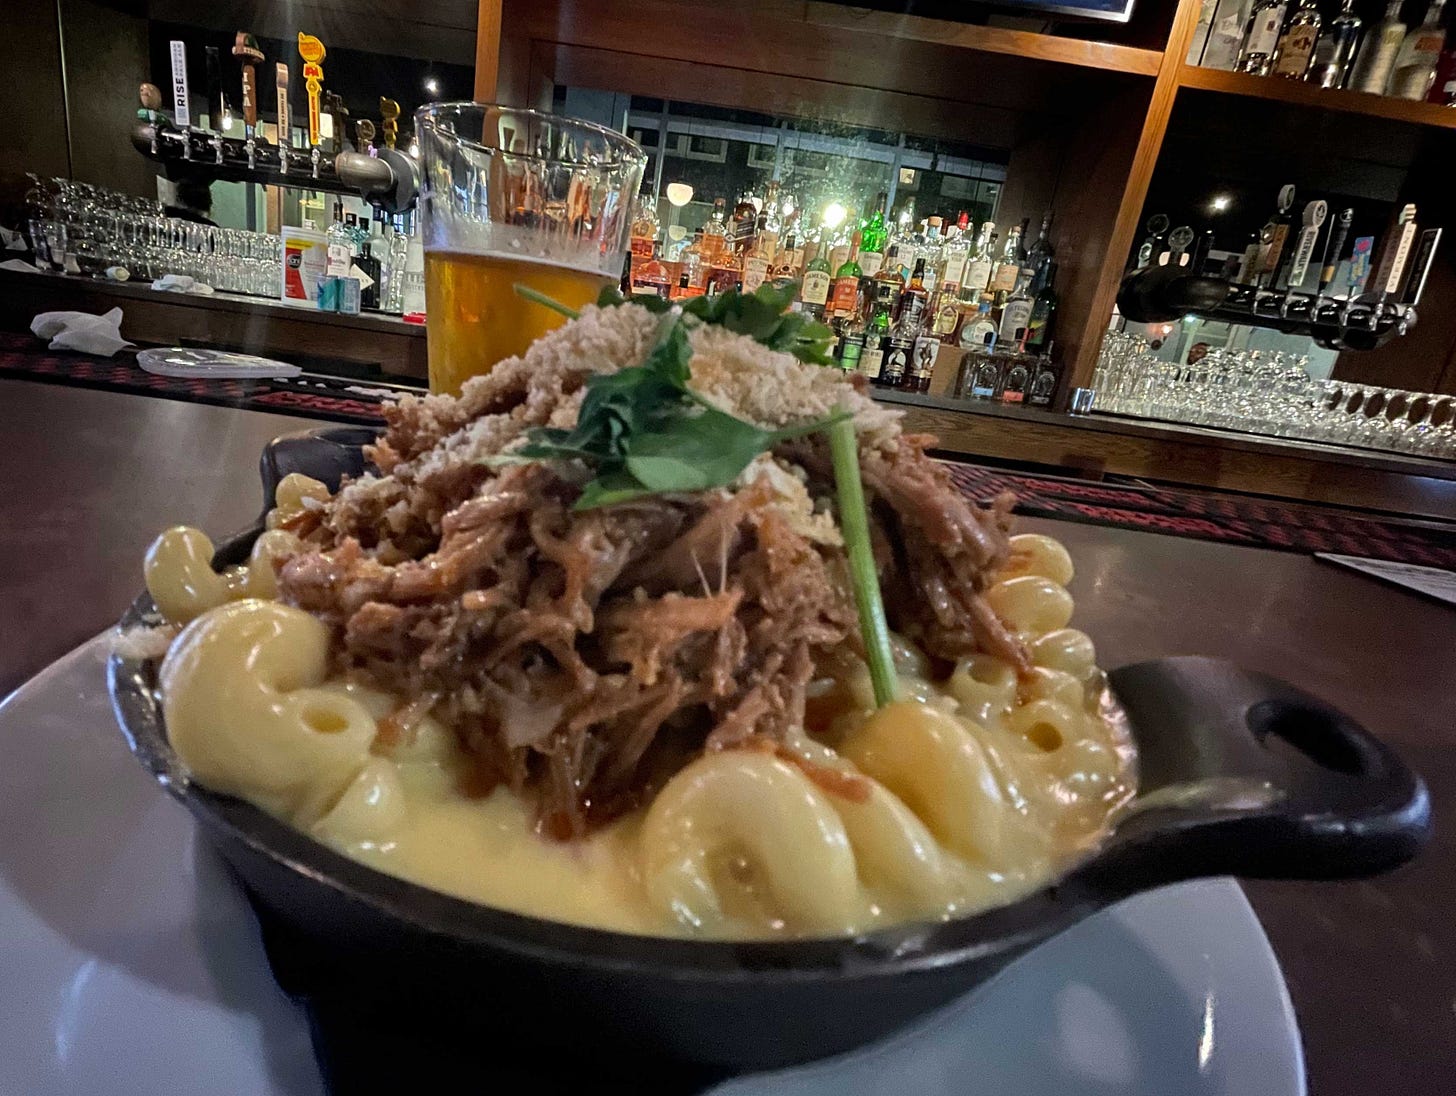 Skillet containing macaroni and cheese with pulled pork.